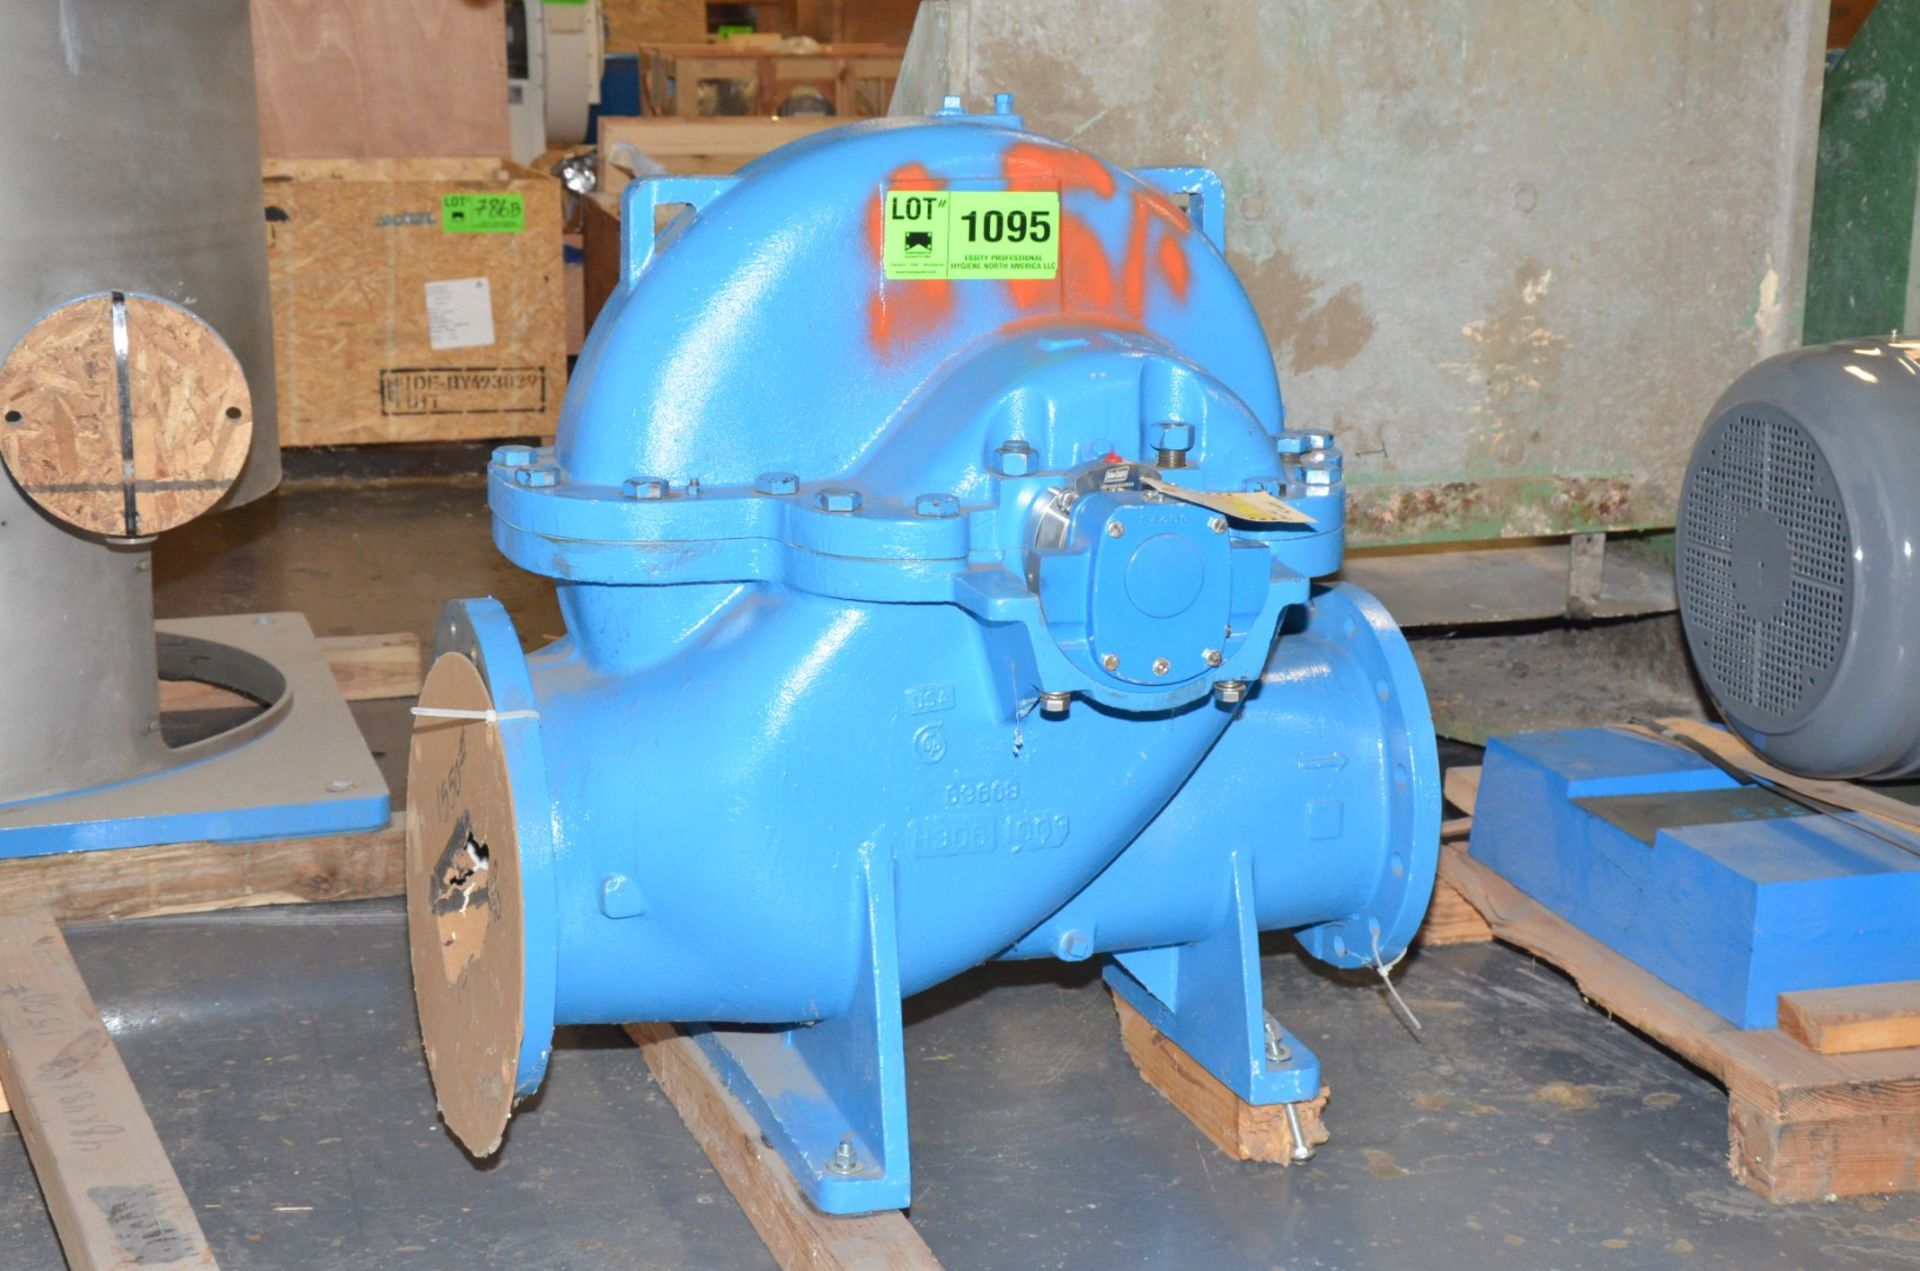 GOULDS FAN PUMP WITH 10" INLET I.D., 12" OUTLET I.D. [RIGGING FEE FOR LOT #1095 - $25 USD PLUS